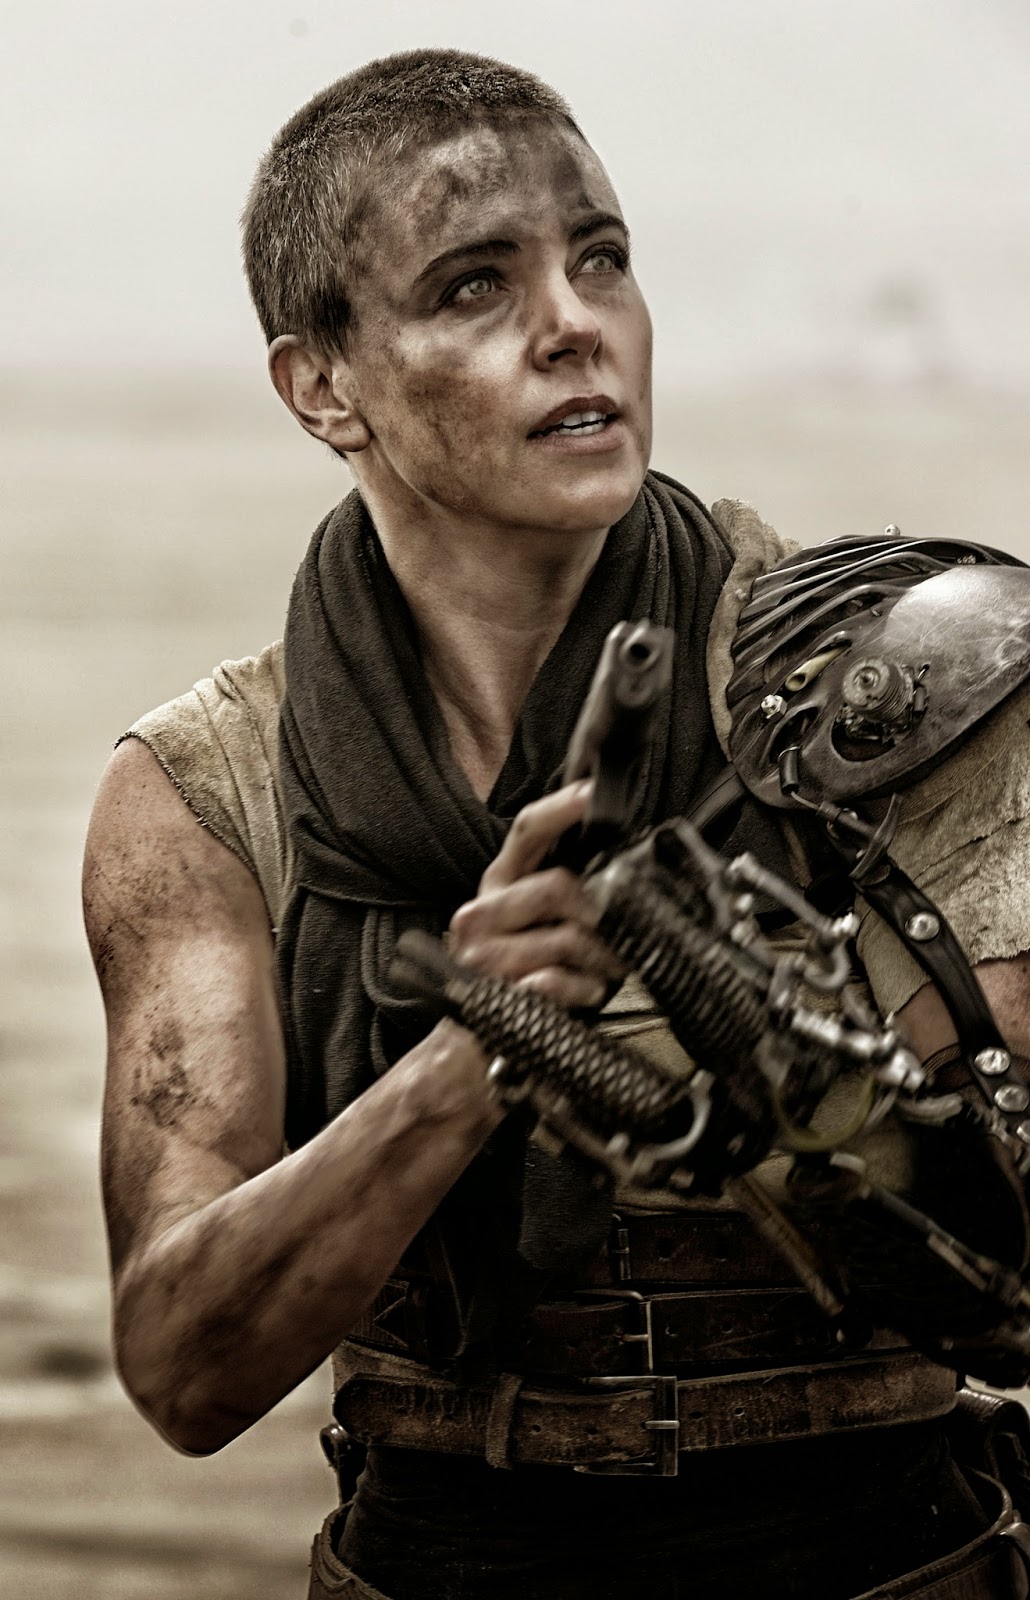 41 New MAD MAX FURY ROAD Pictures The Entertainment Factor